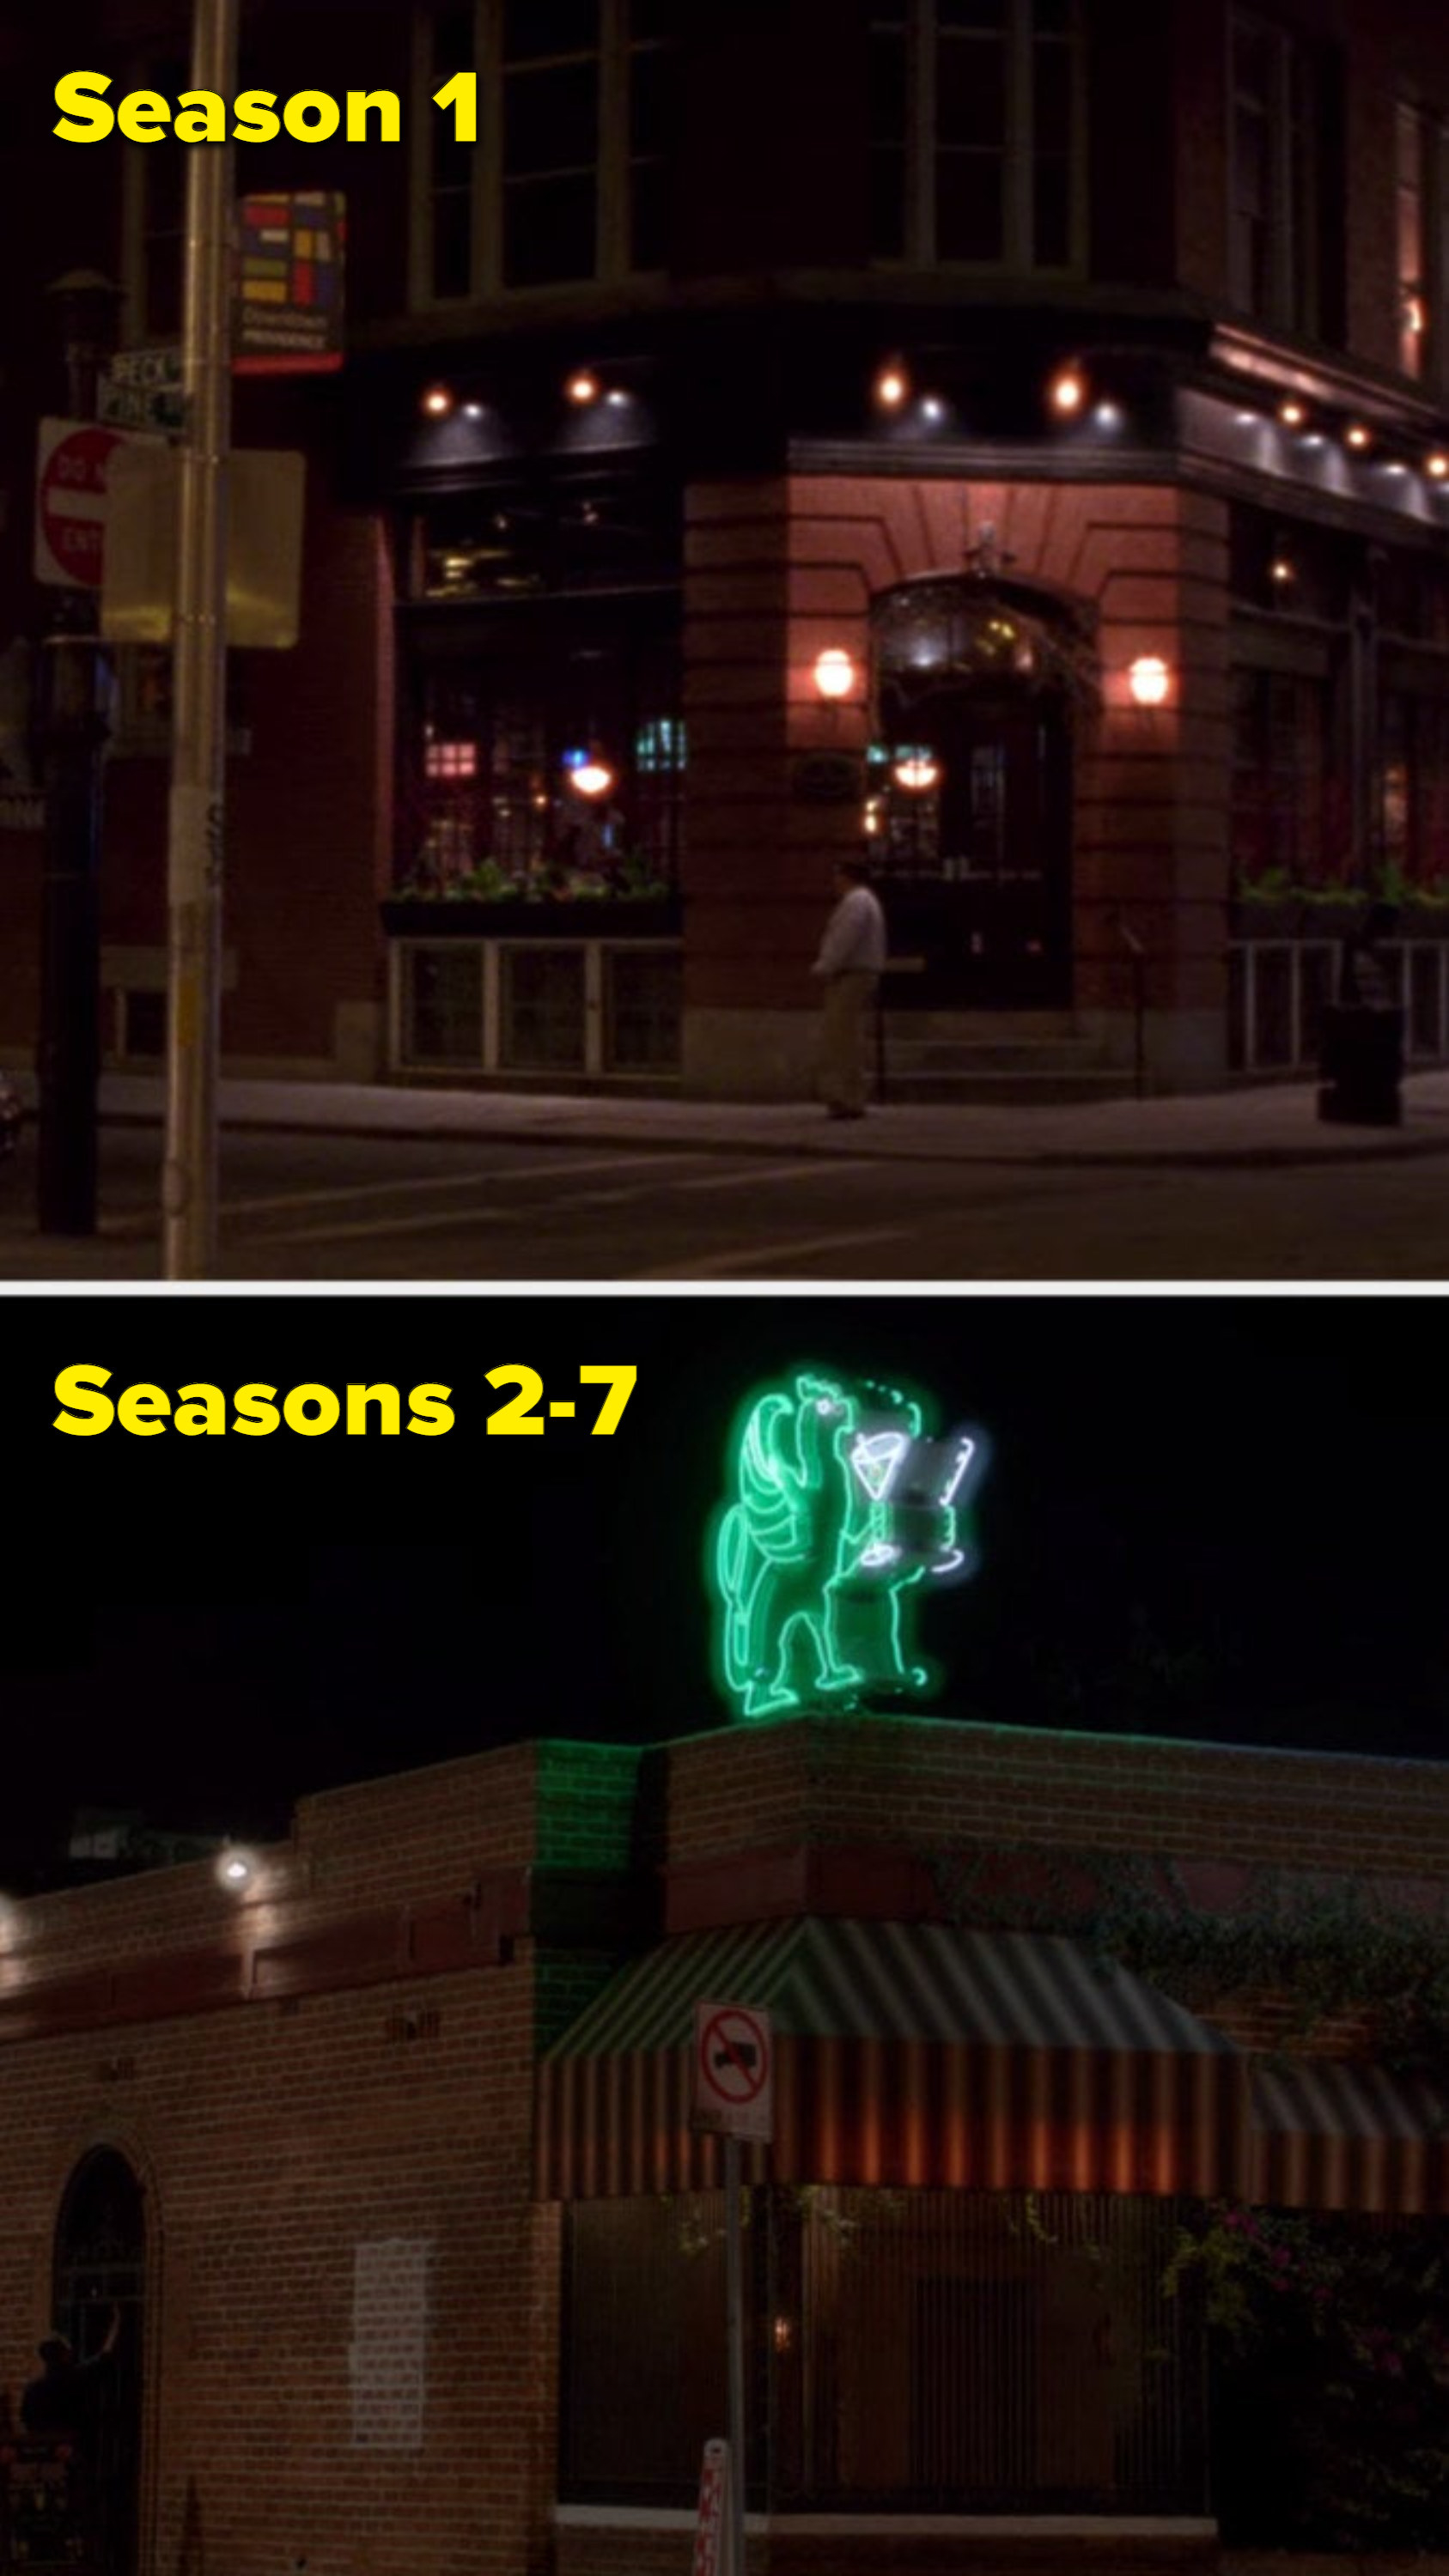 A hip, trendy, downtown bar with the text &quot;season one&quot; and an old dive bar with the text &quot;seasons 2-7&quot;